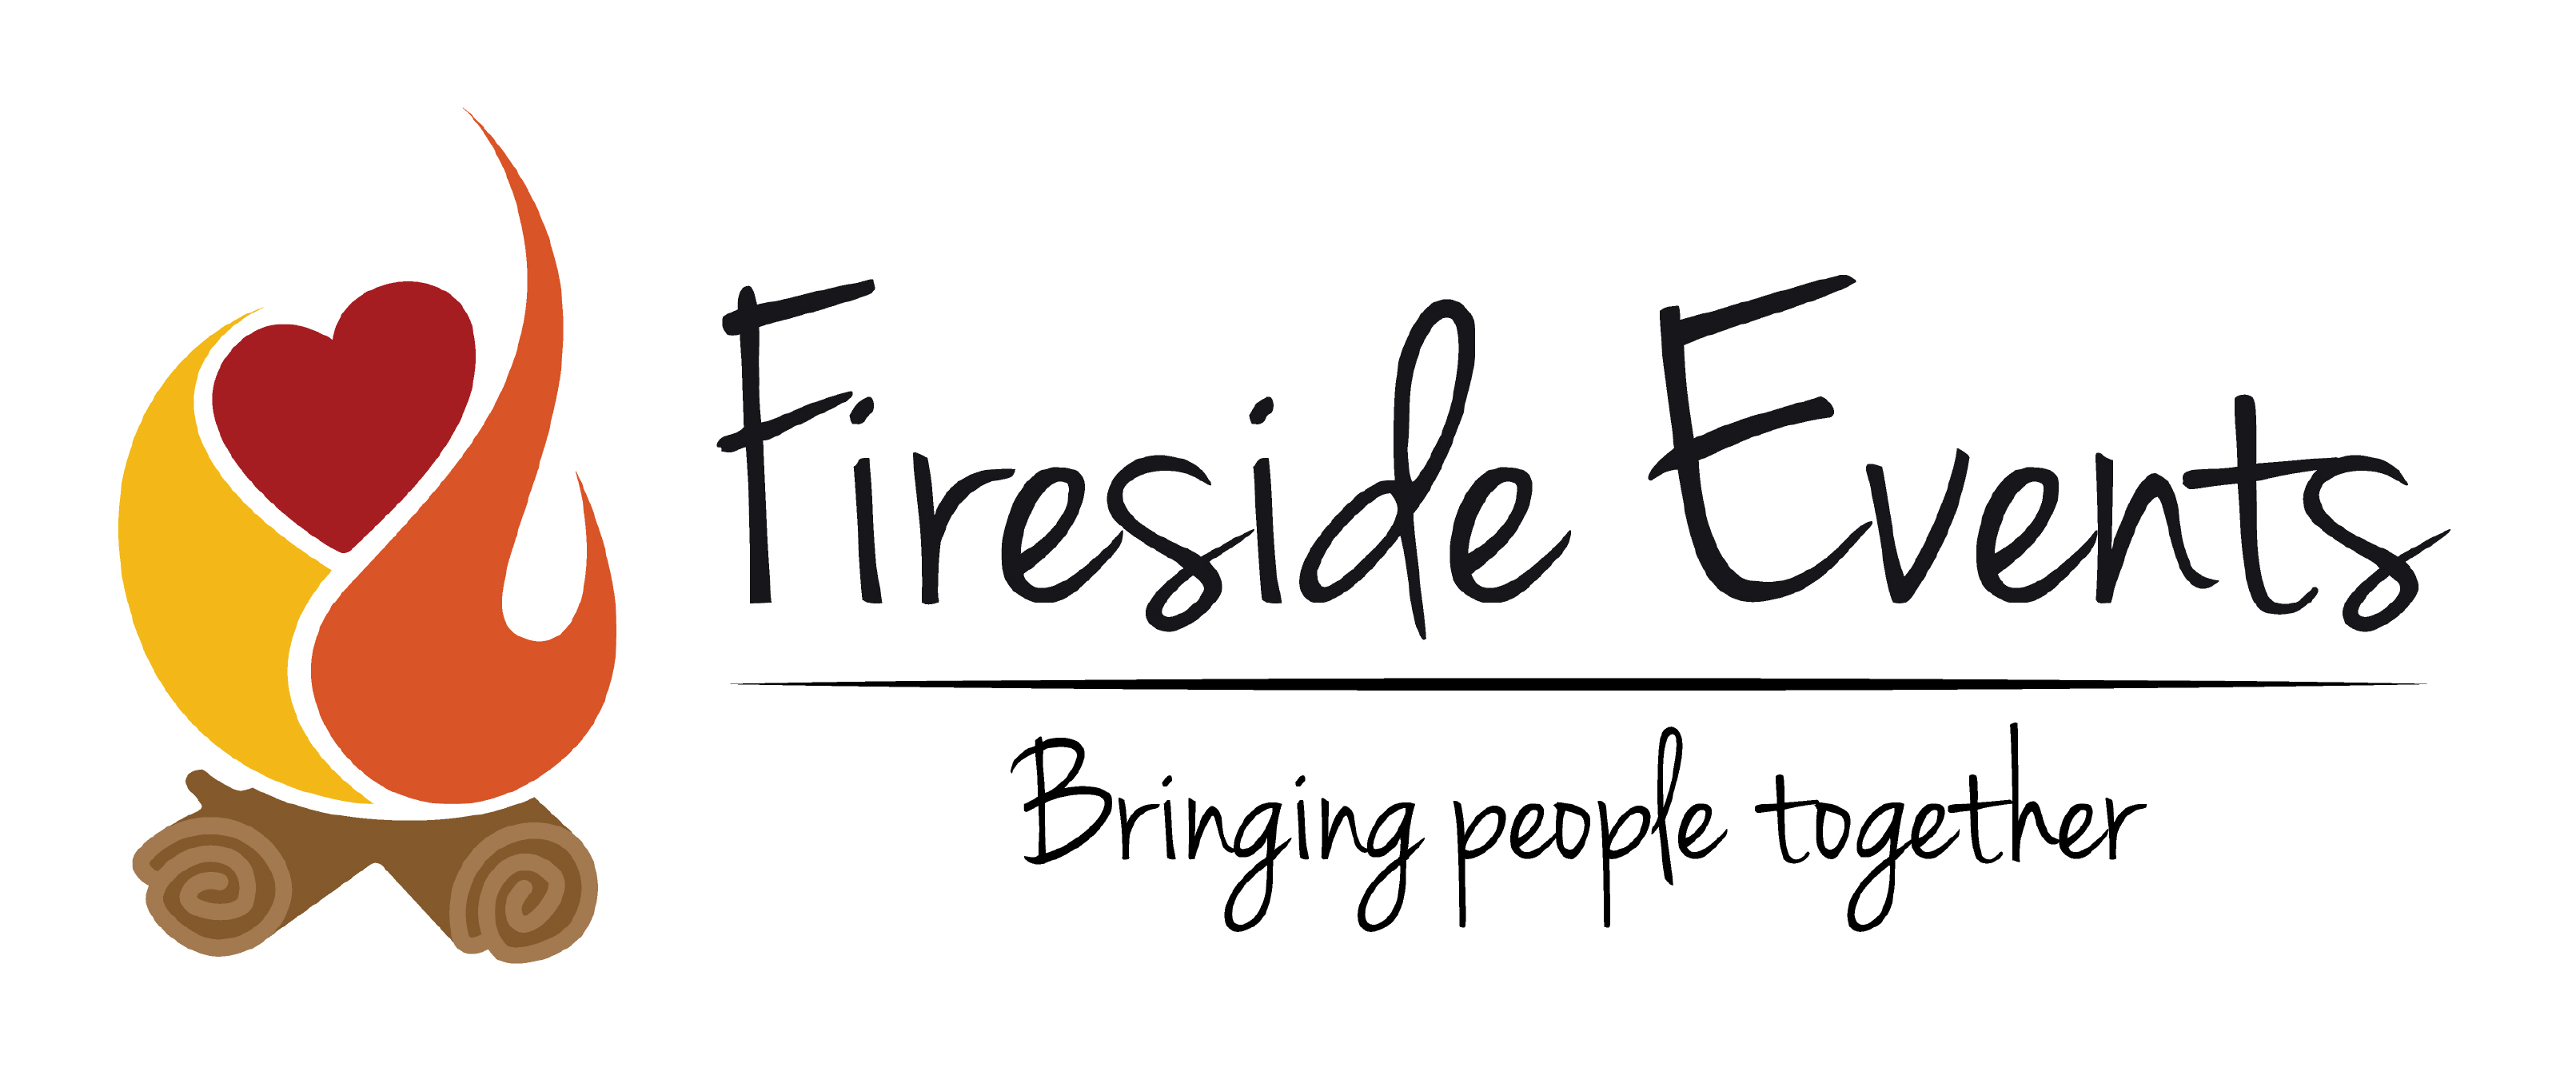 Fireside Events